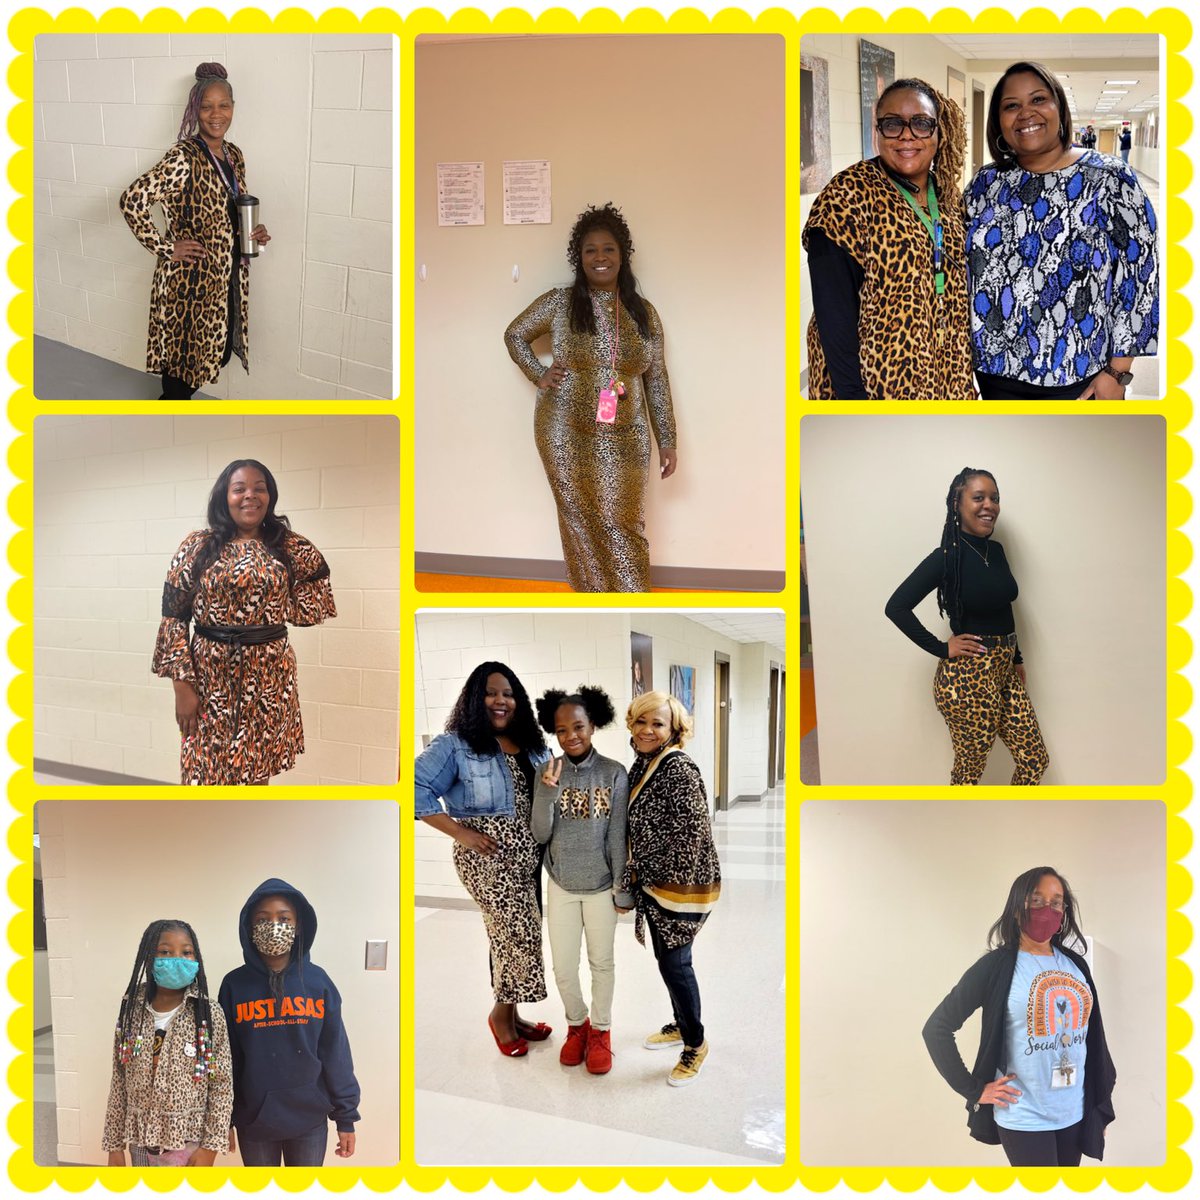 ⁦@apsupdate⁩ No Place For Hate -This Is Us wearing our favorite animal print expressing we are different in the school. “All Are Welcome”. ⁦@DioneDSimon⁩ ⁦@DrArnoldAP_HAES⁩ ⁦@Retha_Woolfolk⁩ ⁦@DrLisaHerring⁩ ⁦@ATL_Counselors⁩ @wendyjack